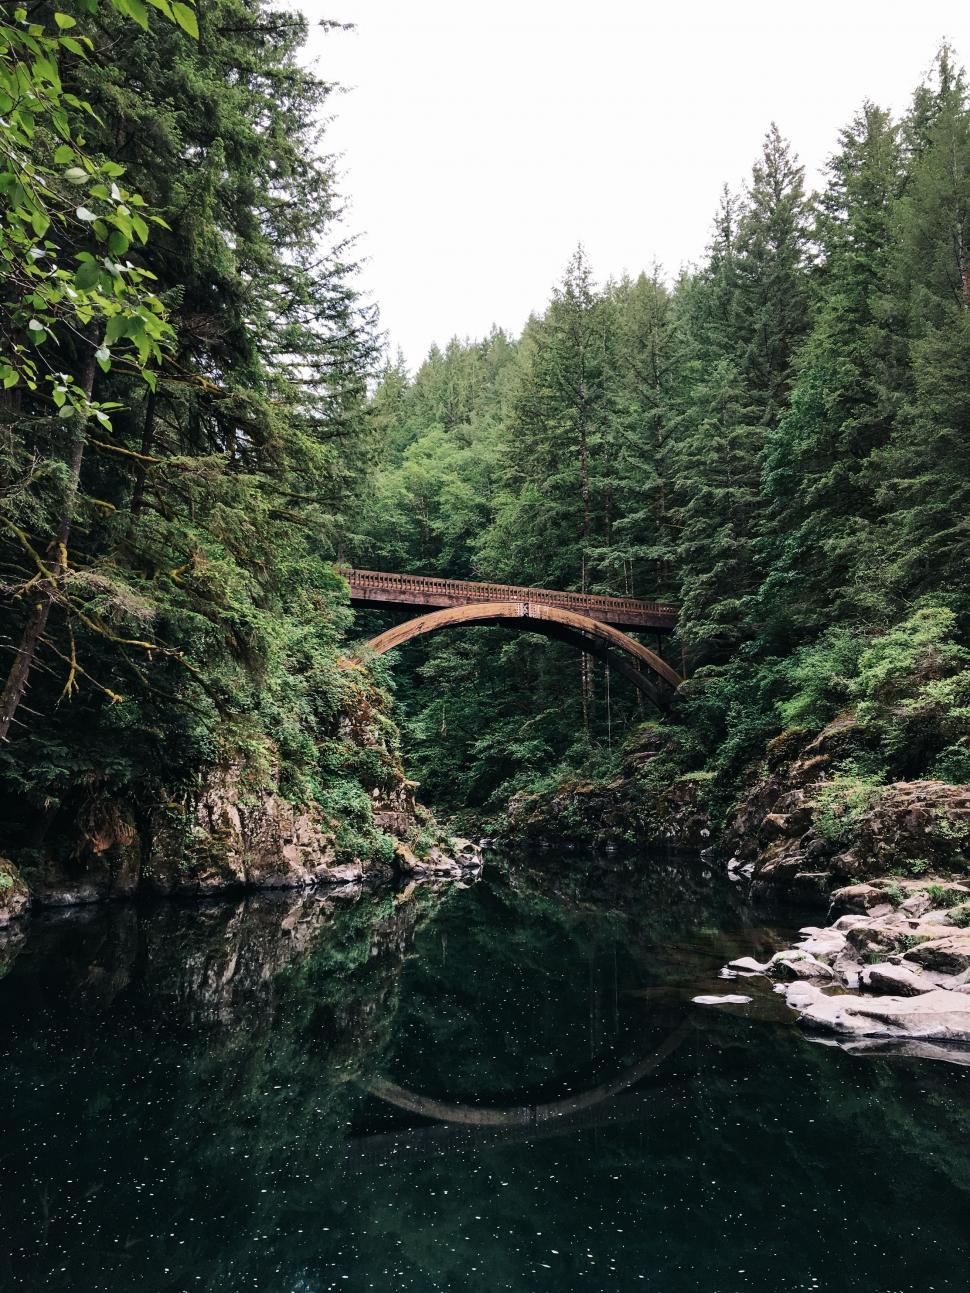 Free Image of Bridge Over a River Surrounded by Trees 